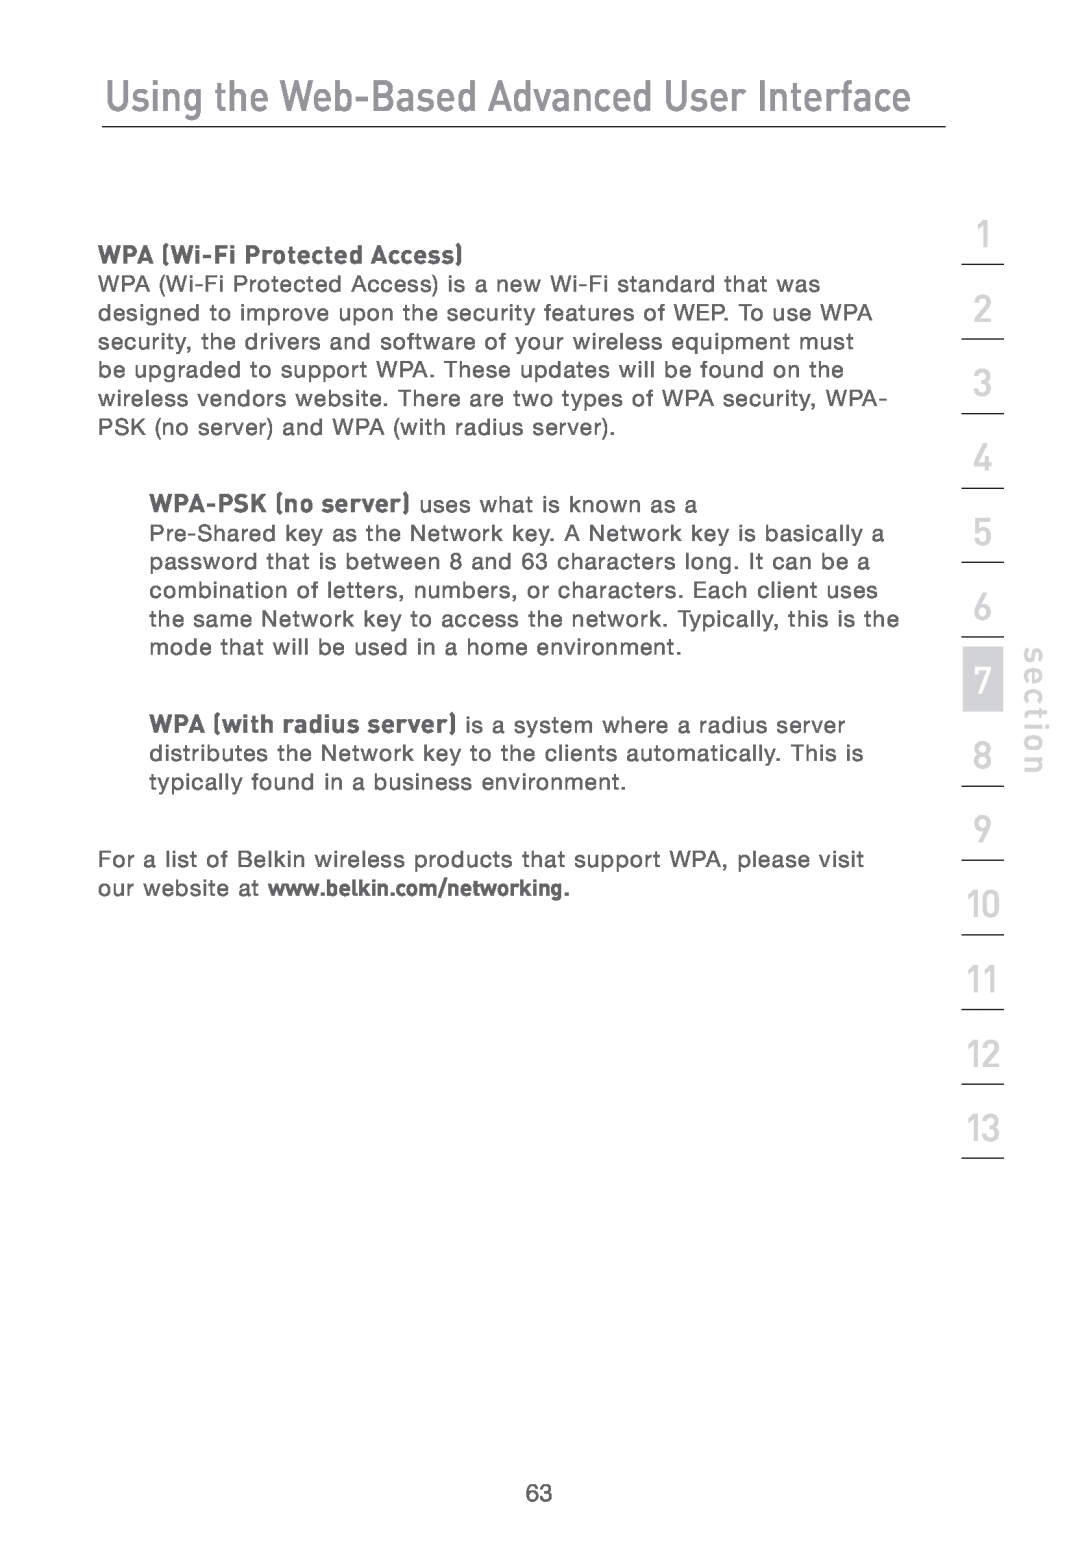 Belkin F5D7231-4P user manual WPA Wi-Fi Protected Access, Using the Web-Based Advanced User Interface, section 